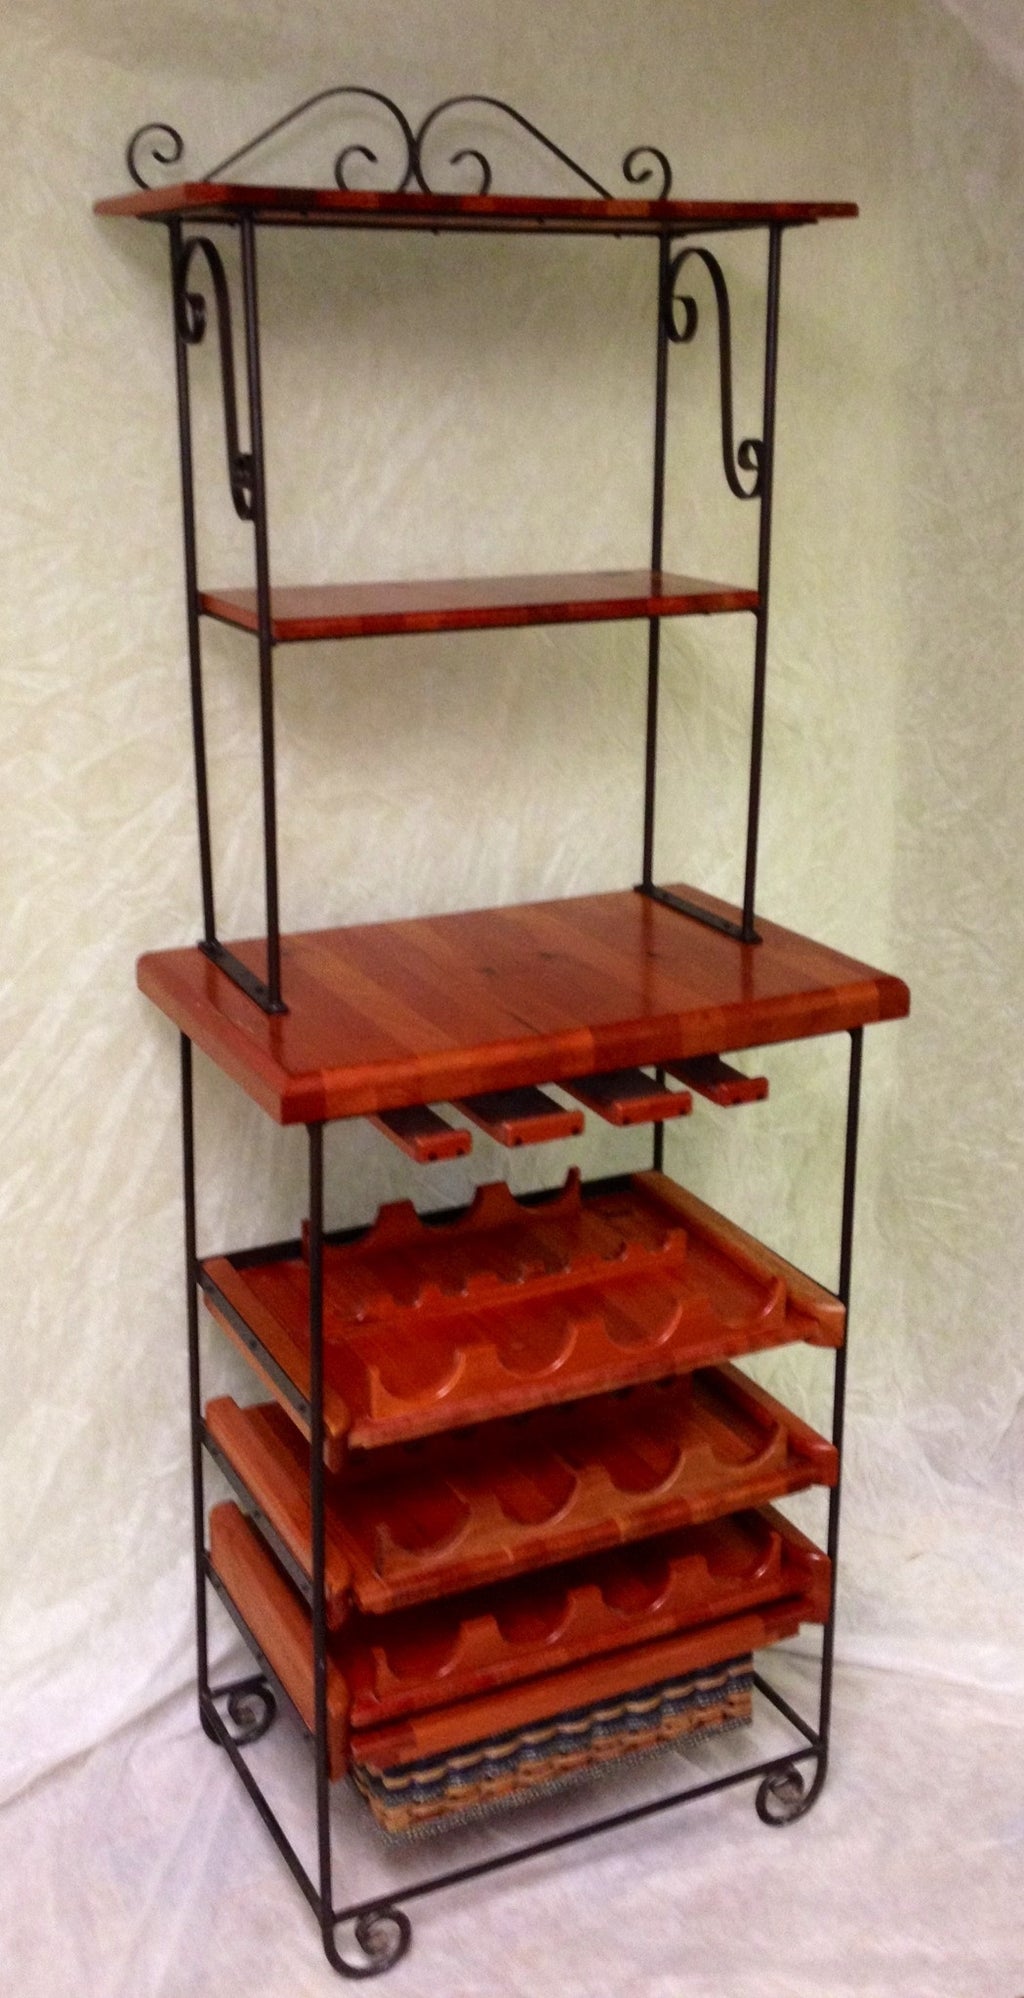 Table-Wine Rack with tall riser